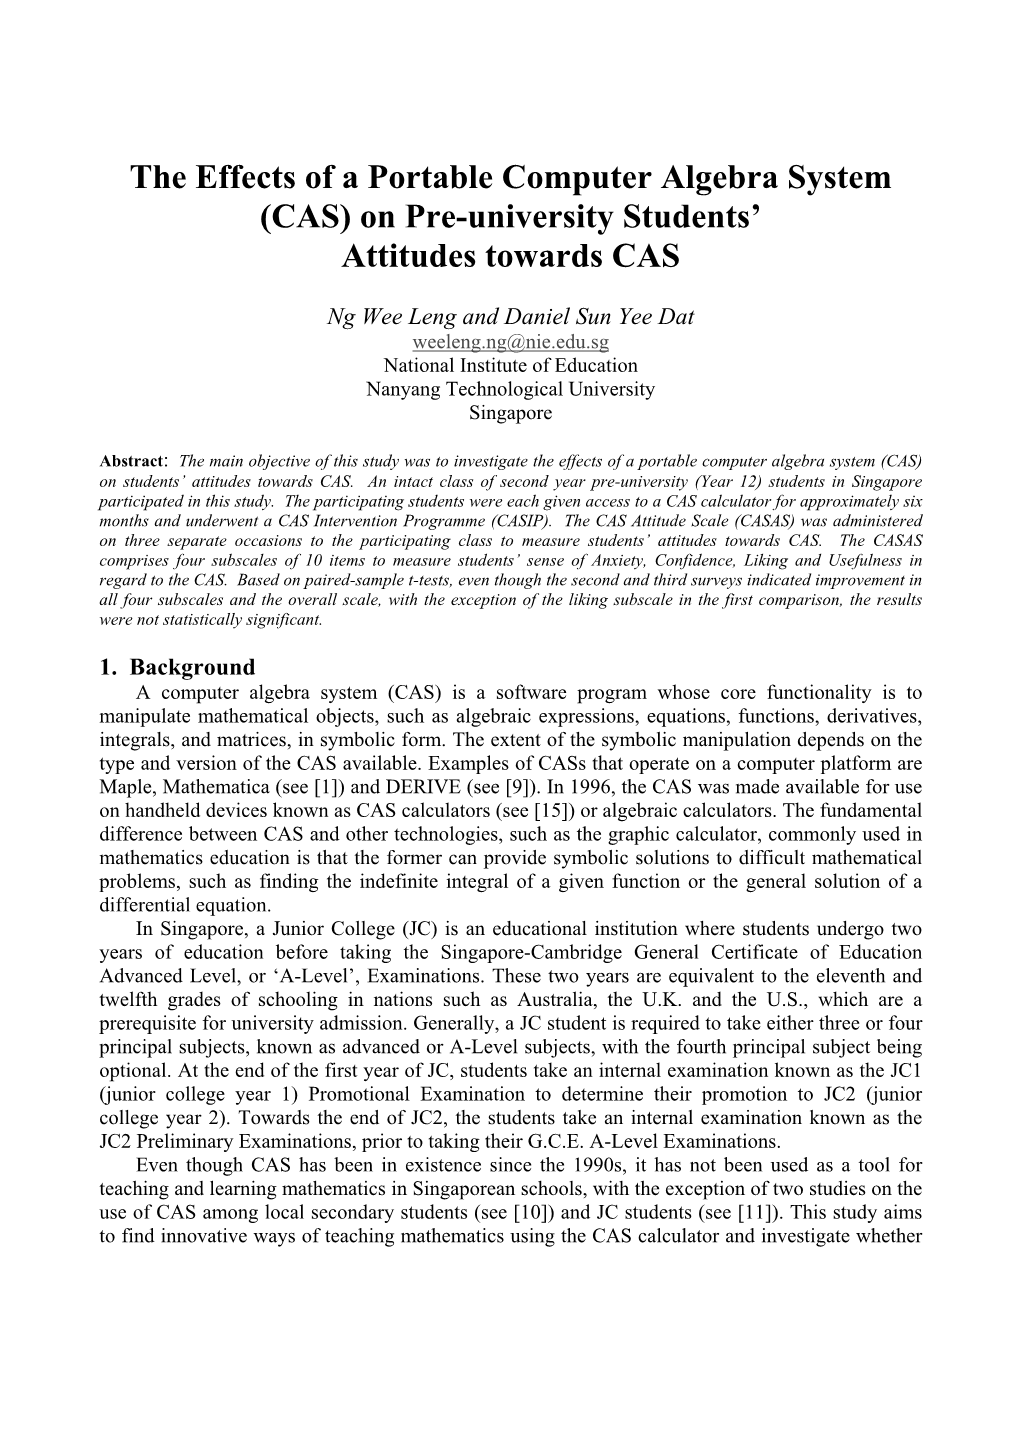 The Effects of a Portable Computer Algebra System (CAS) on Pre-University Students’ Attitudes Towards CAS